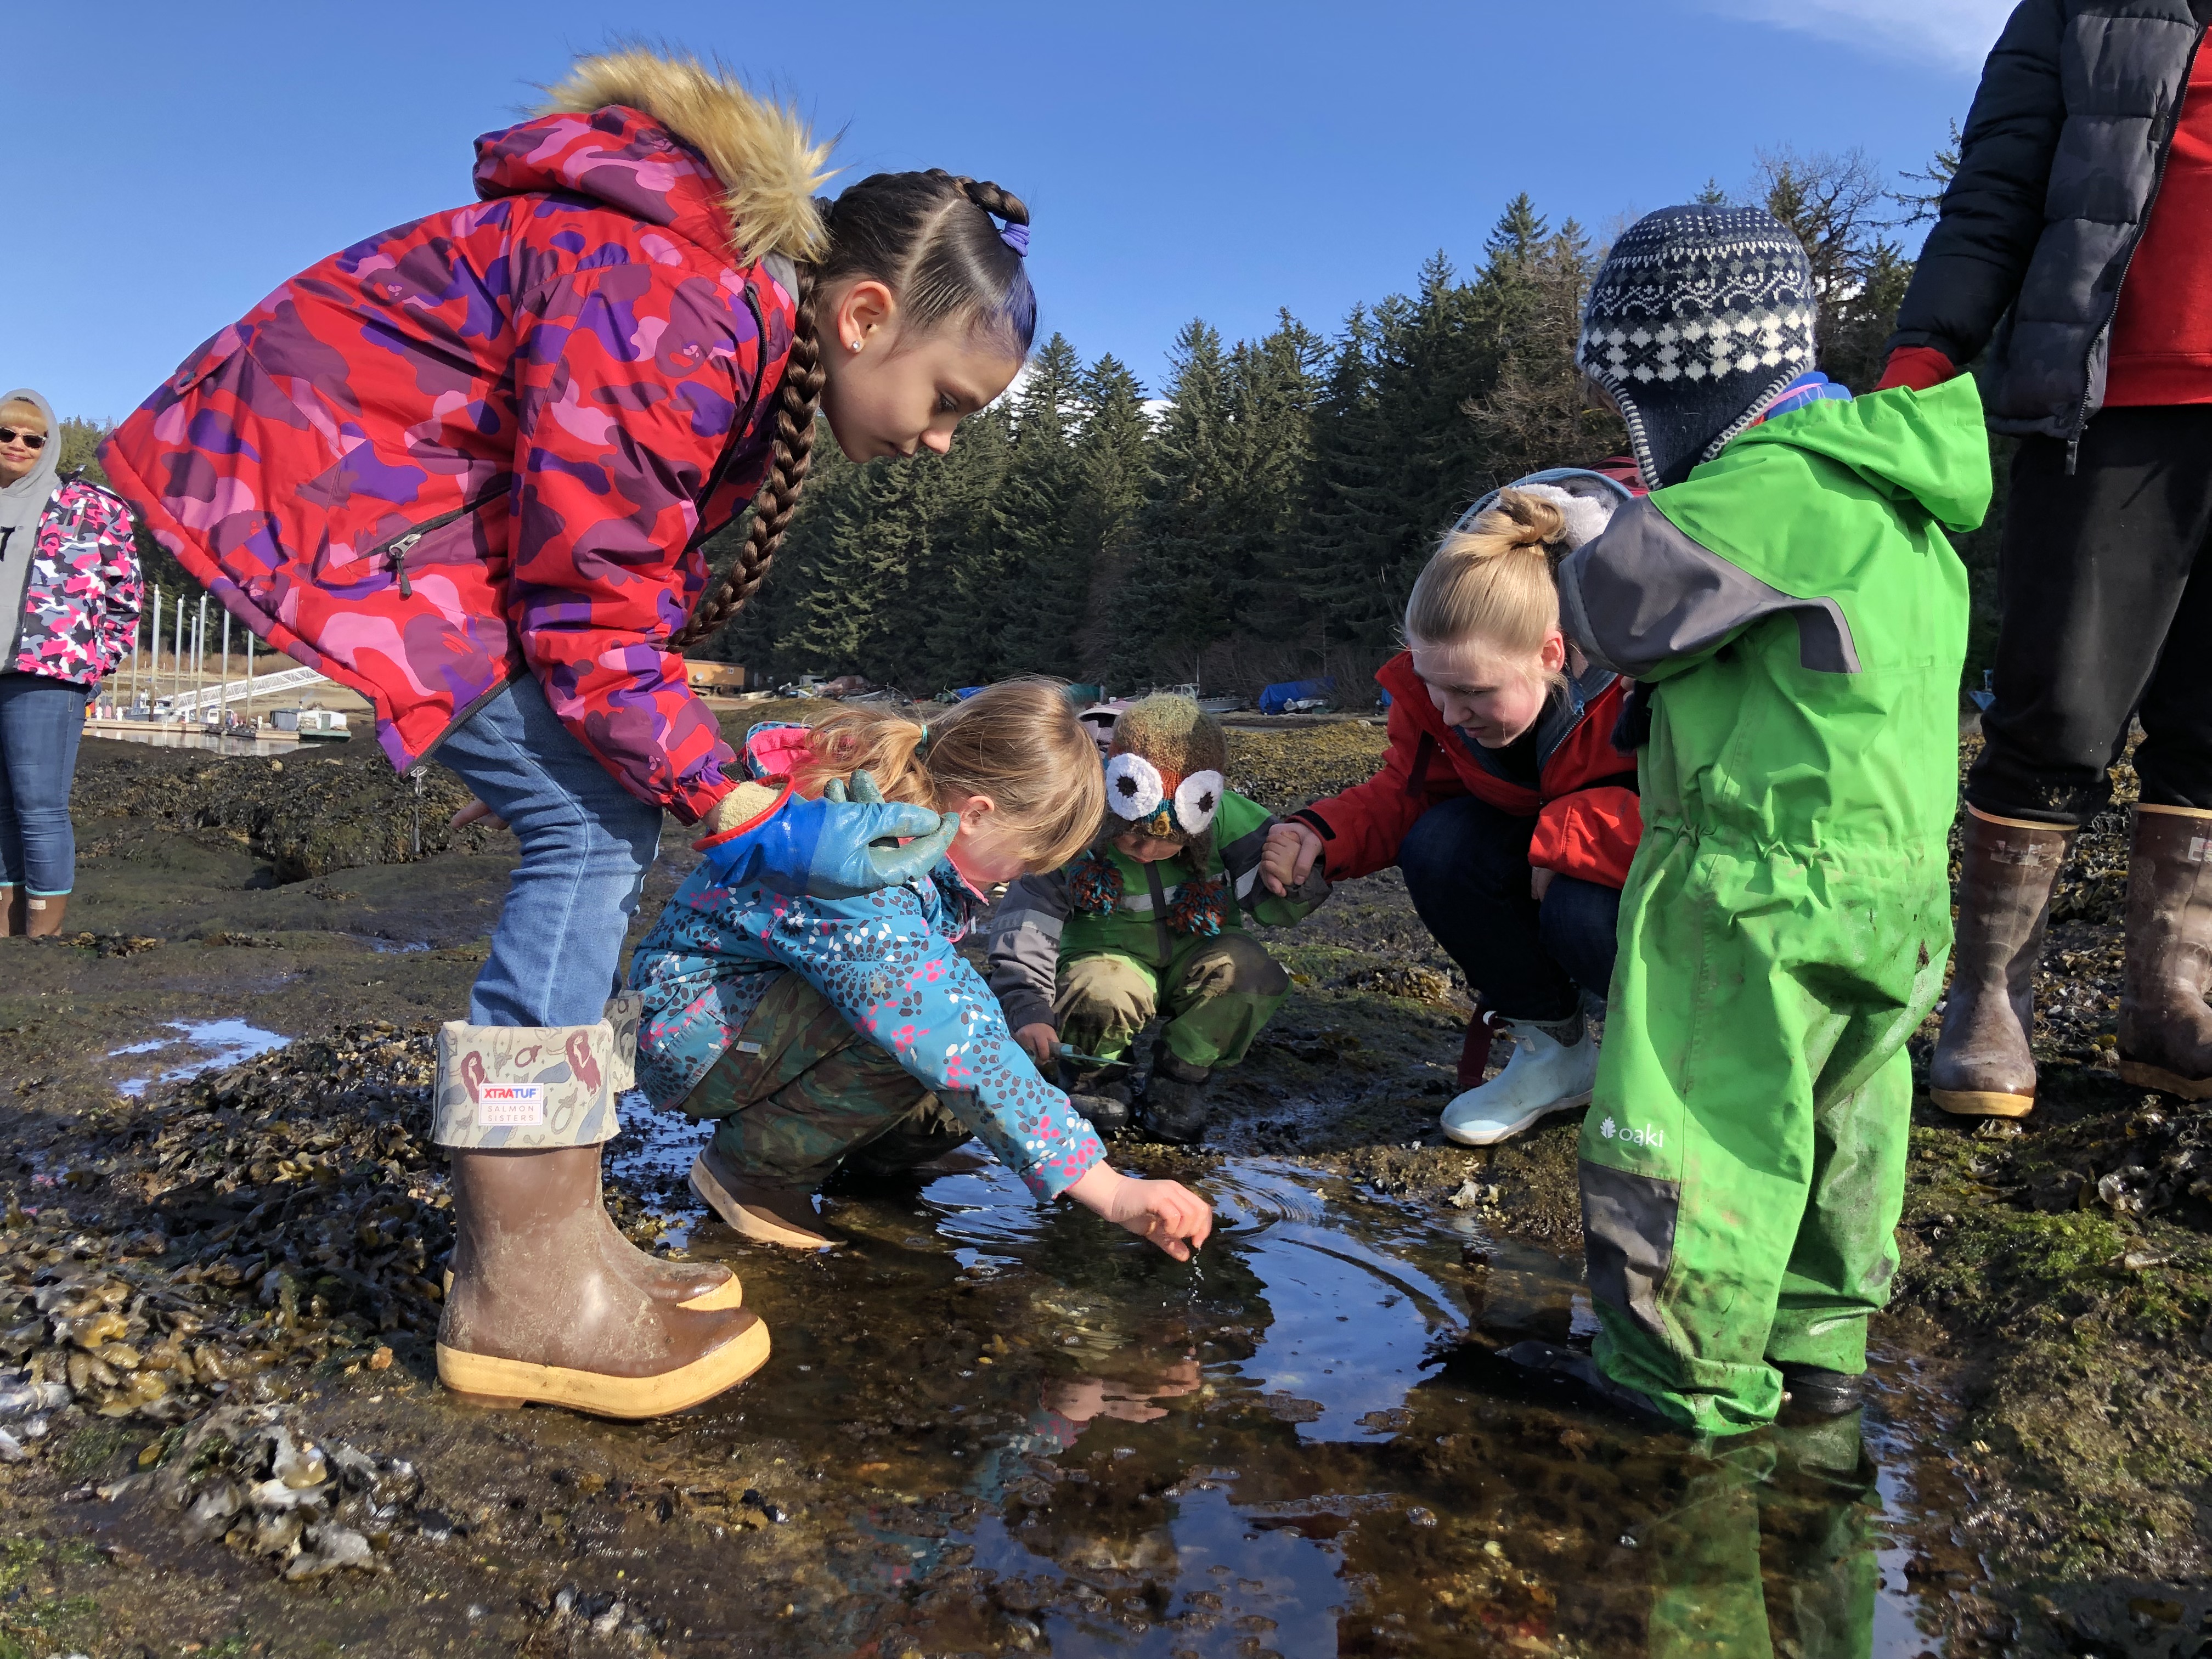 Elementary students gathered around a tide pool at the beach